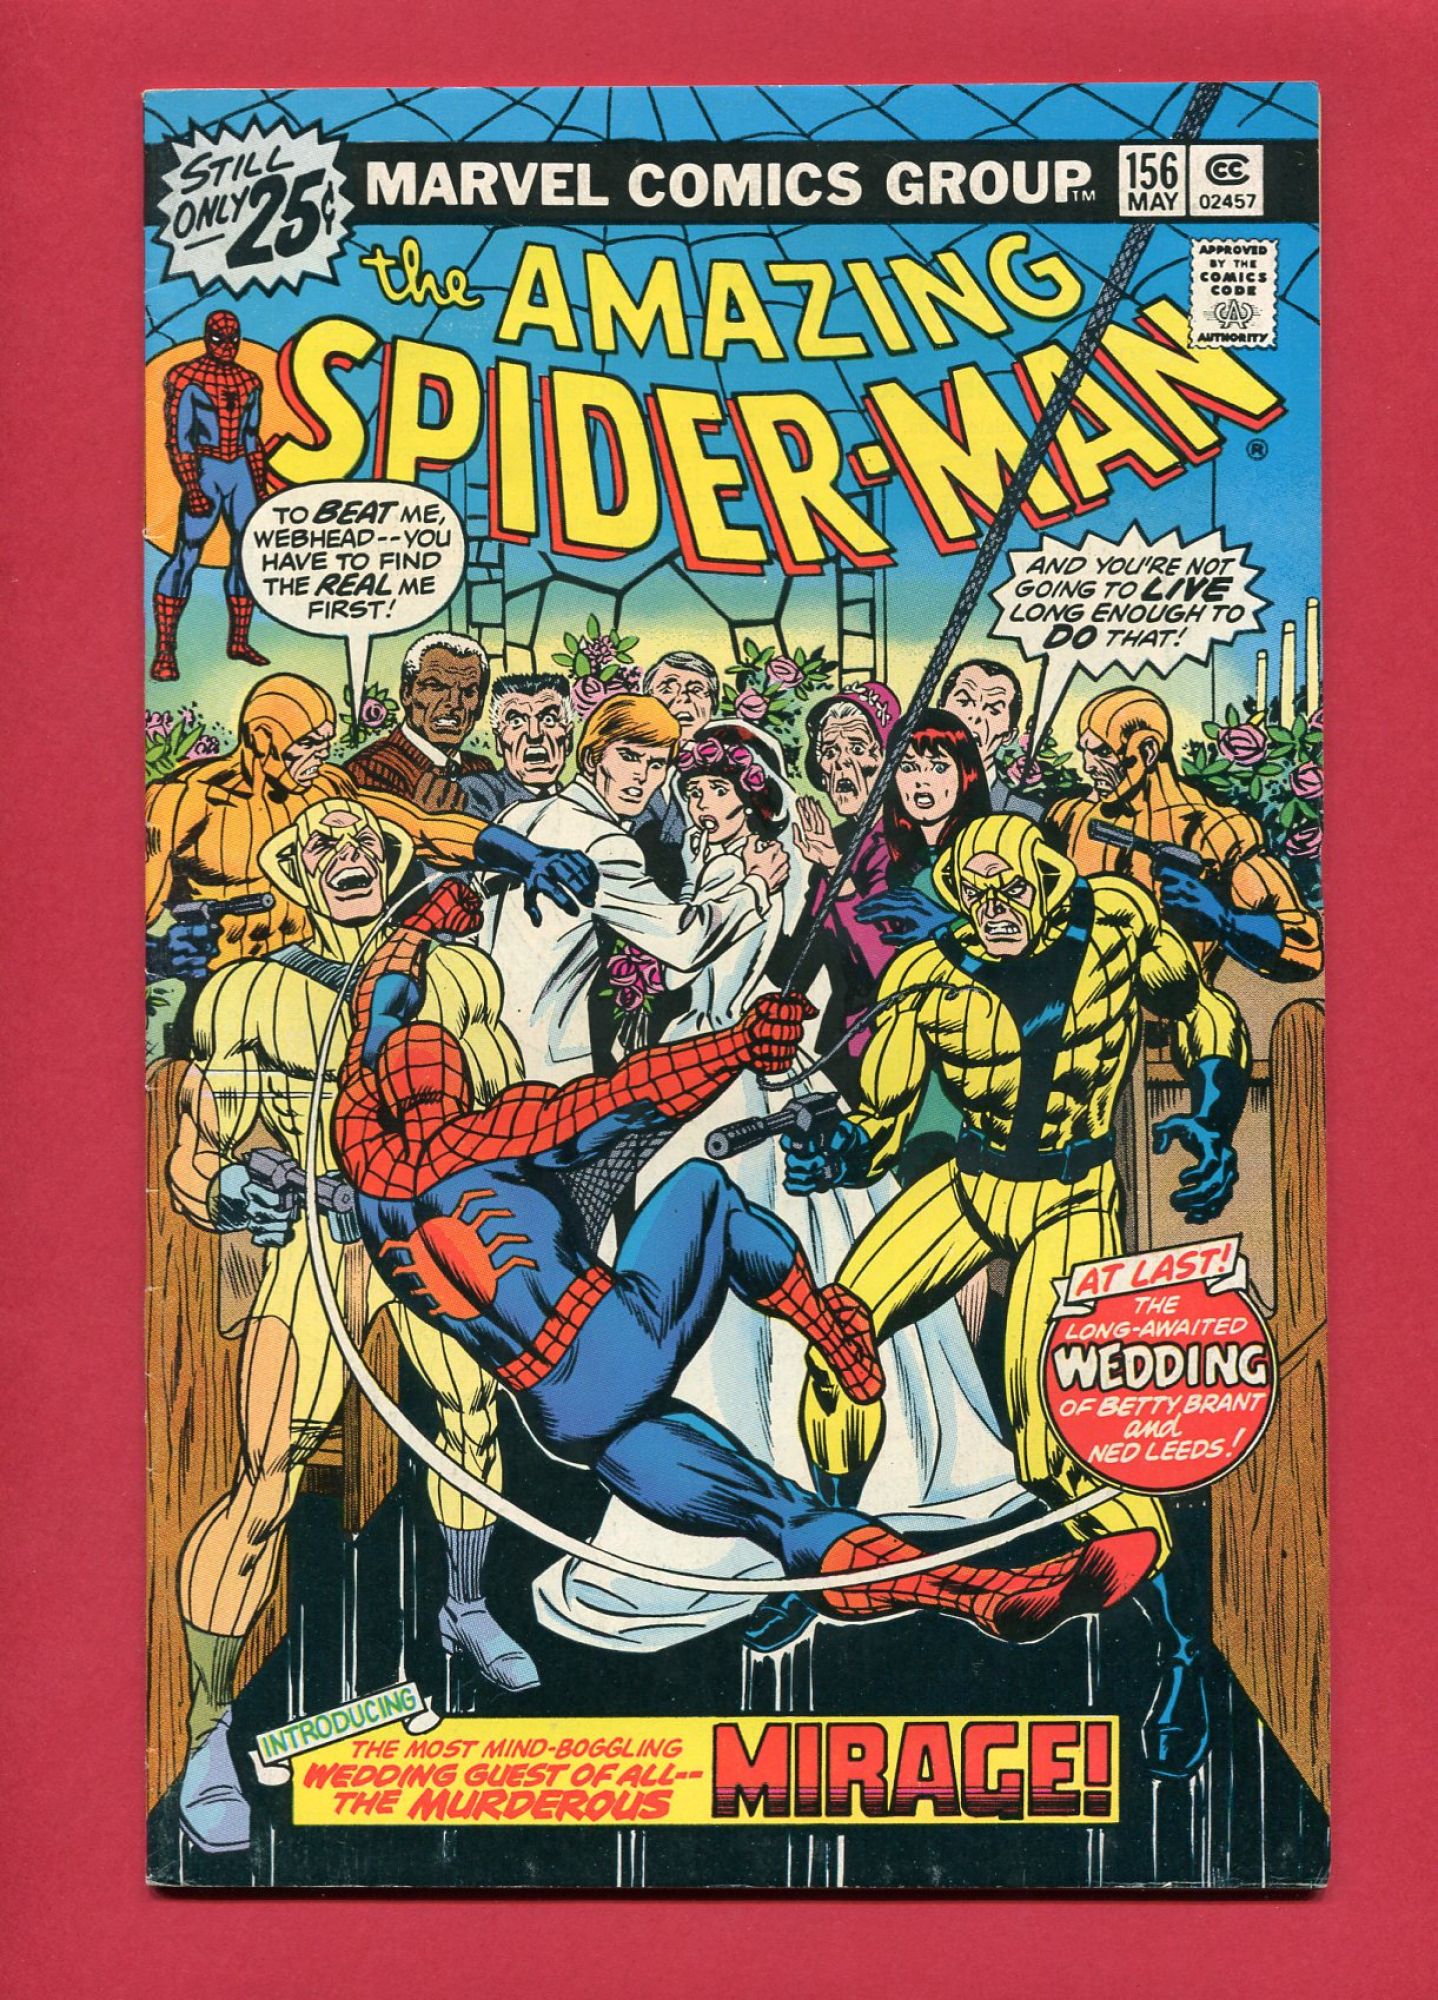 Amazing Spider-Man #156, May 1976, 6.0 FN